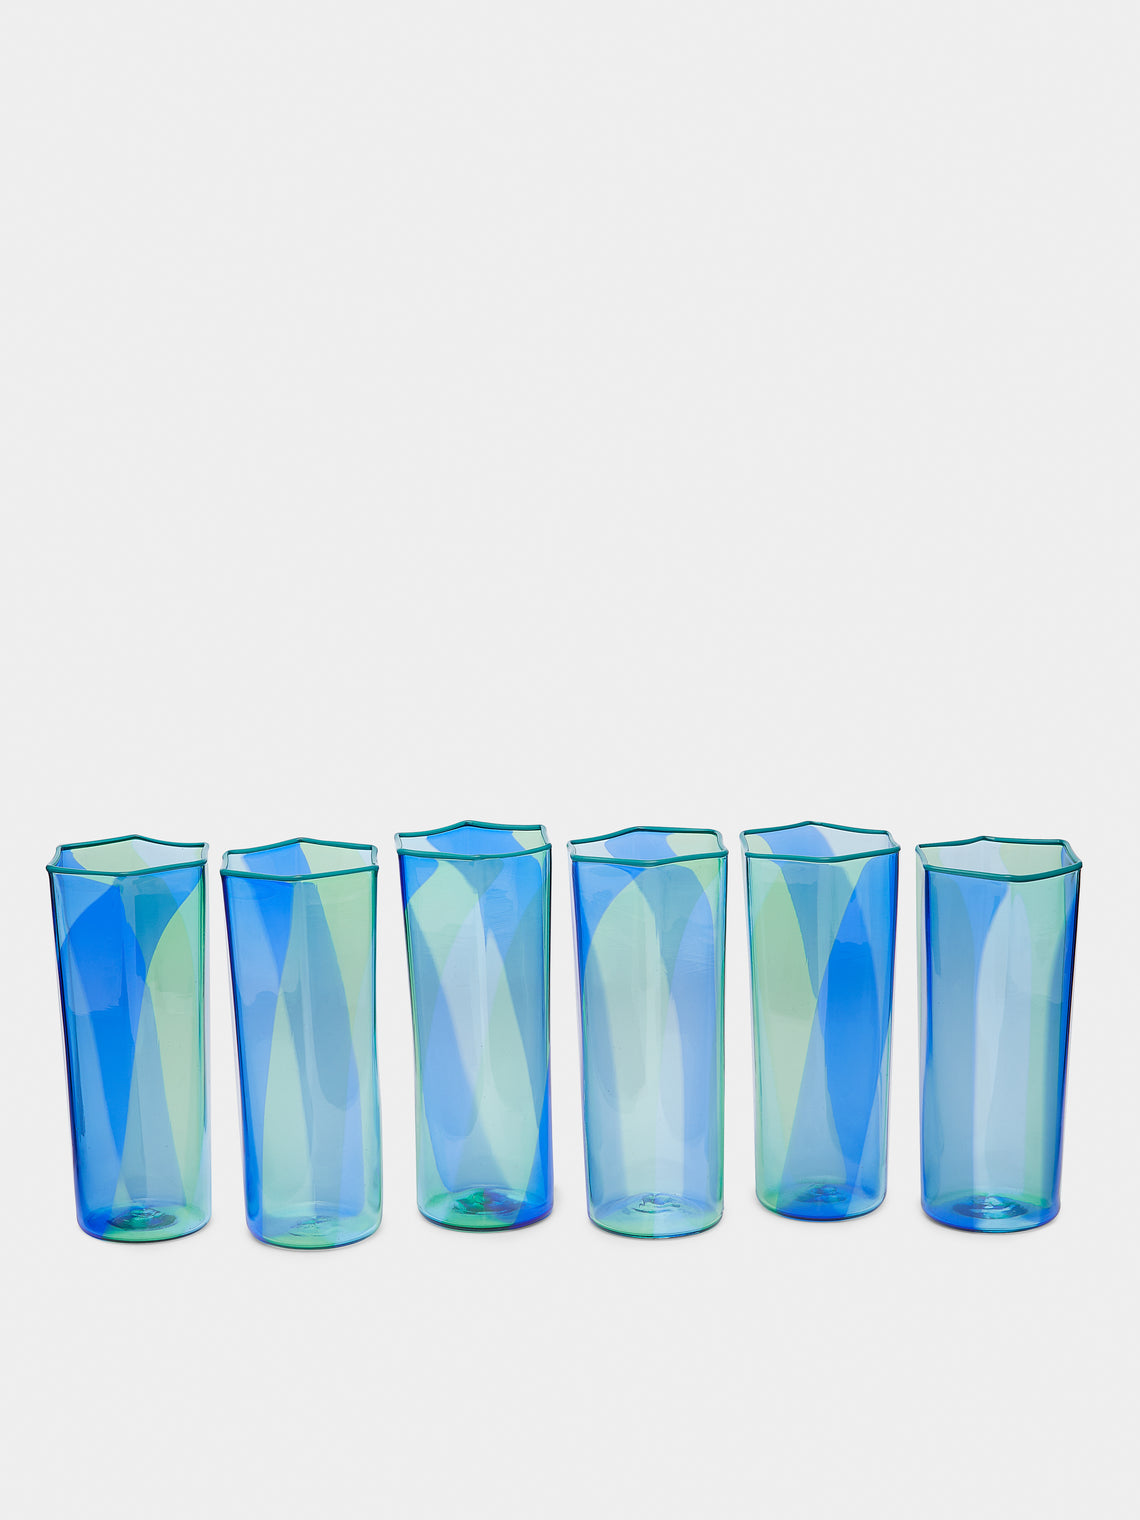 Antique and Vintage - 1970s Murano Hexagonal Glass (Set of 6) - Blue - ABASK